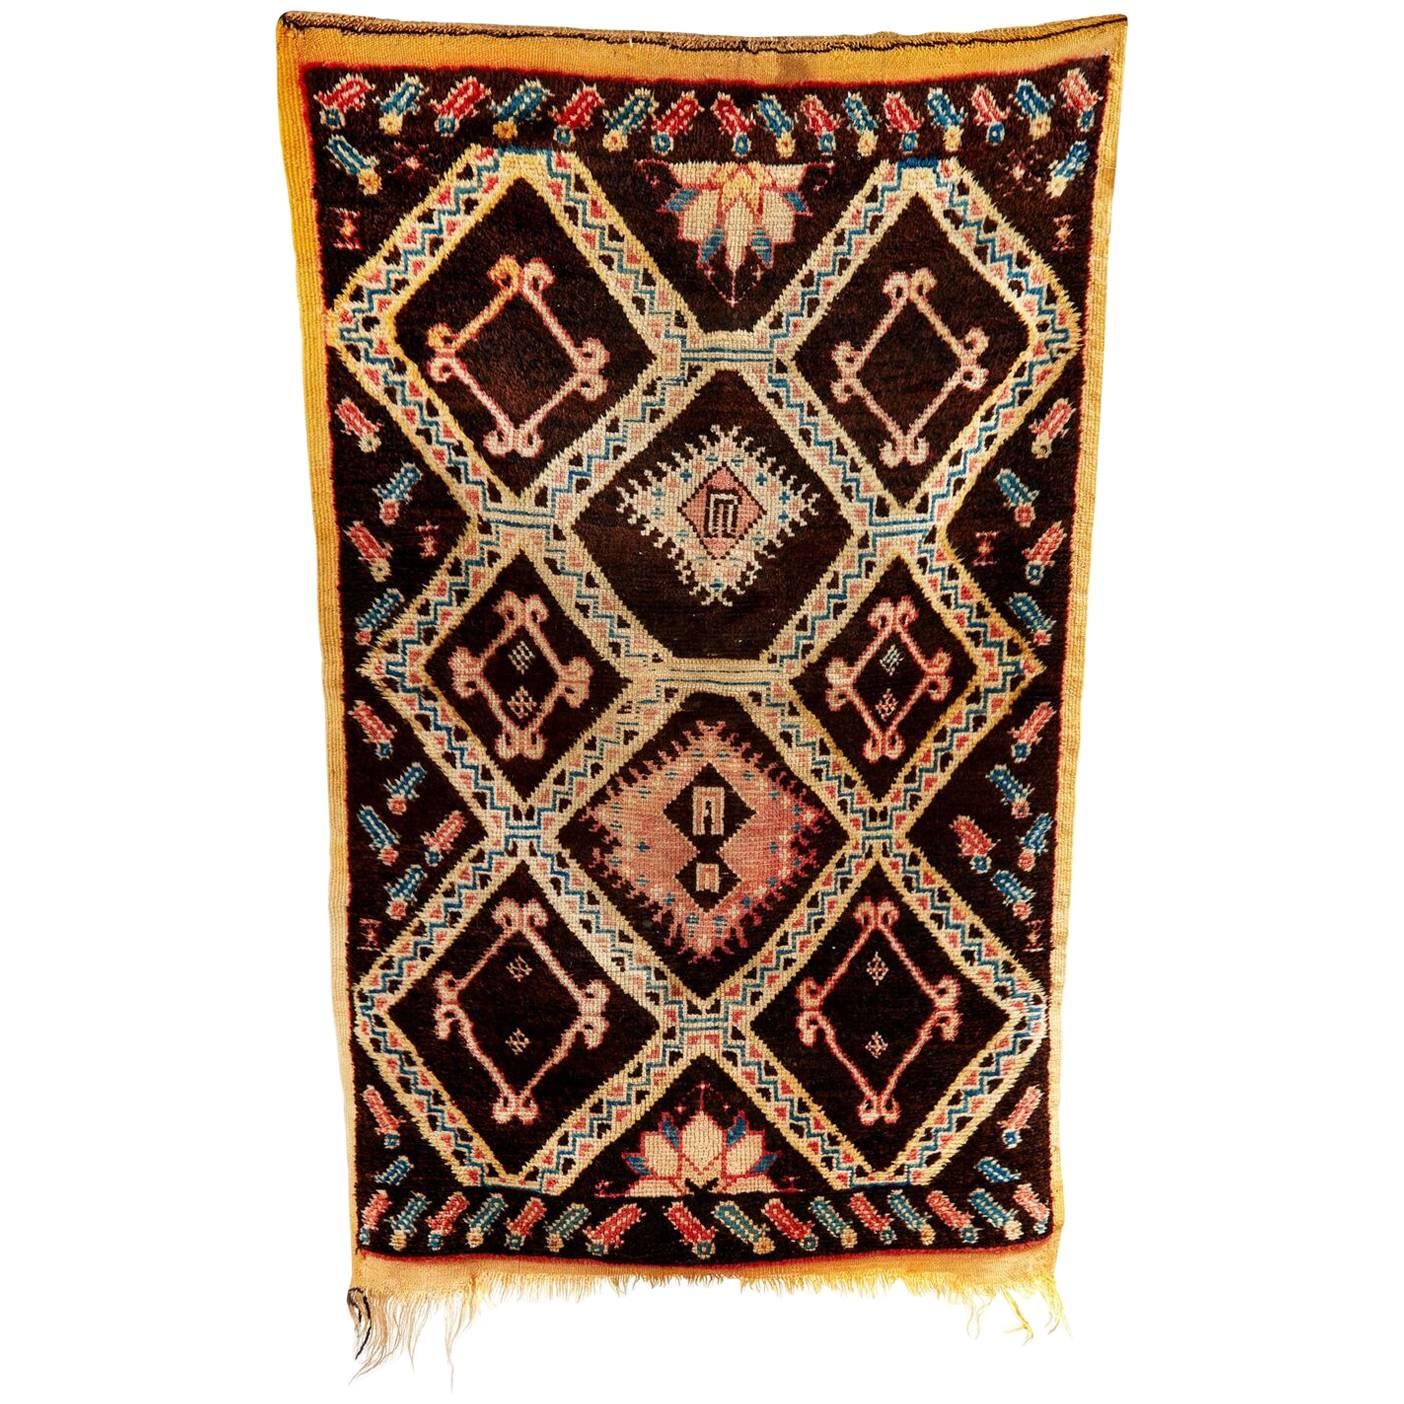 Early 20th Century Moroccan Berber Rug Found in the Atlas Mountains